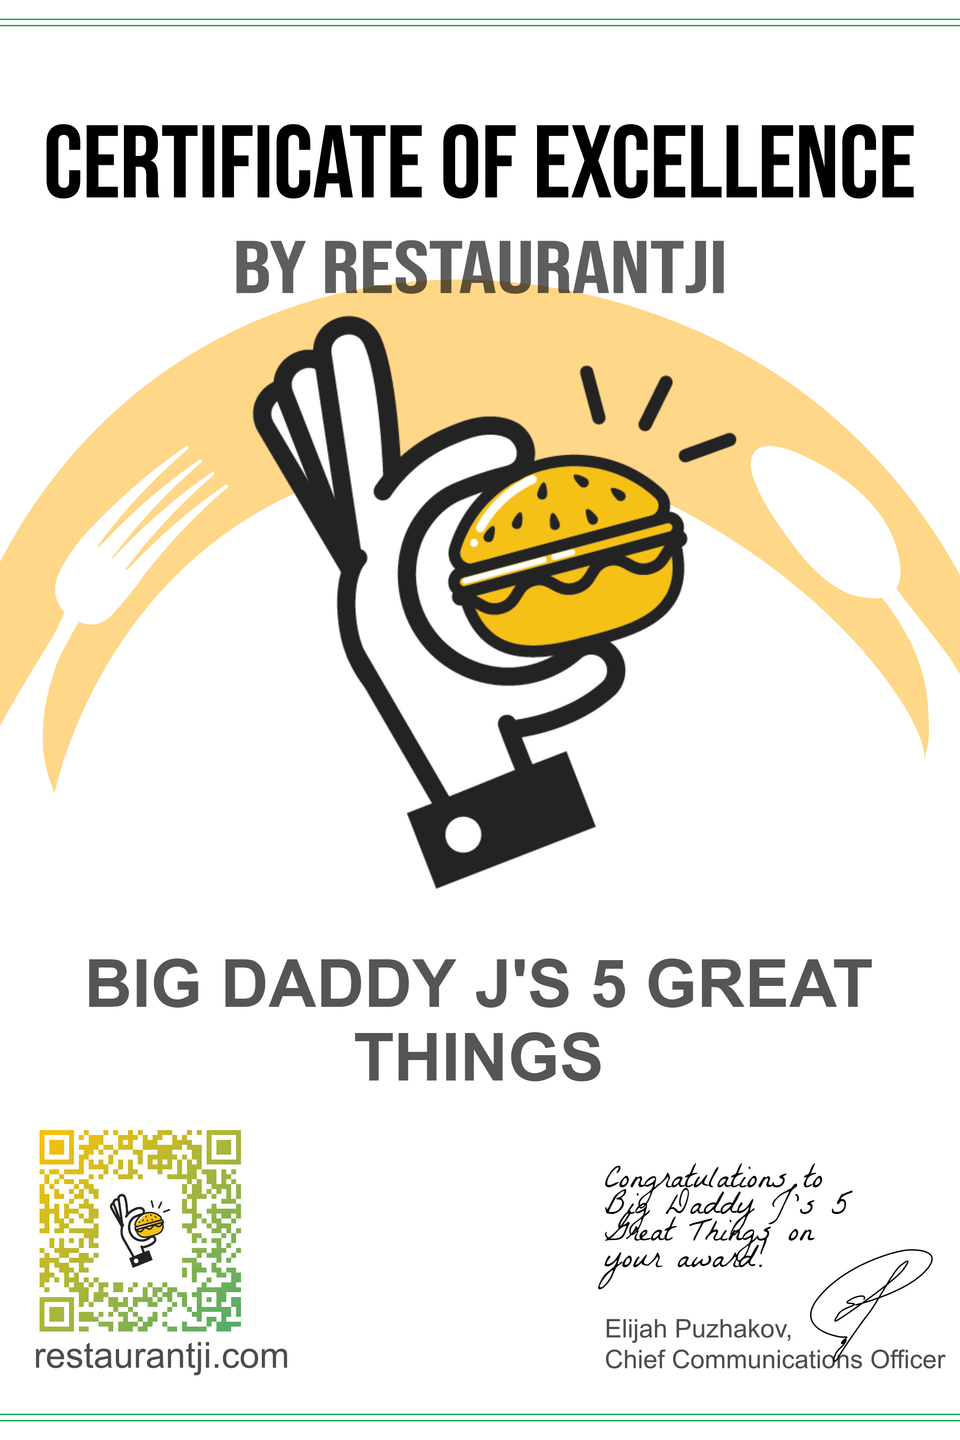 Big daddy j's 5 great things